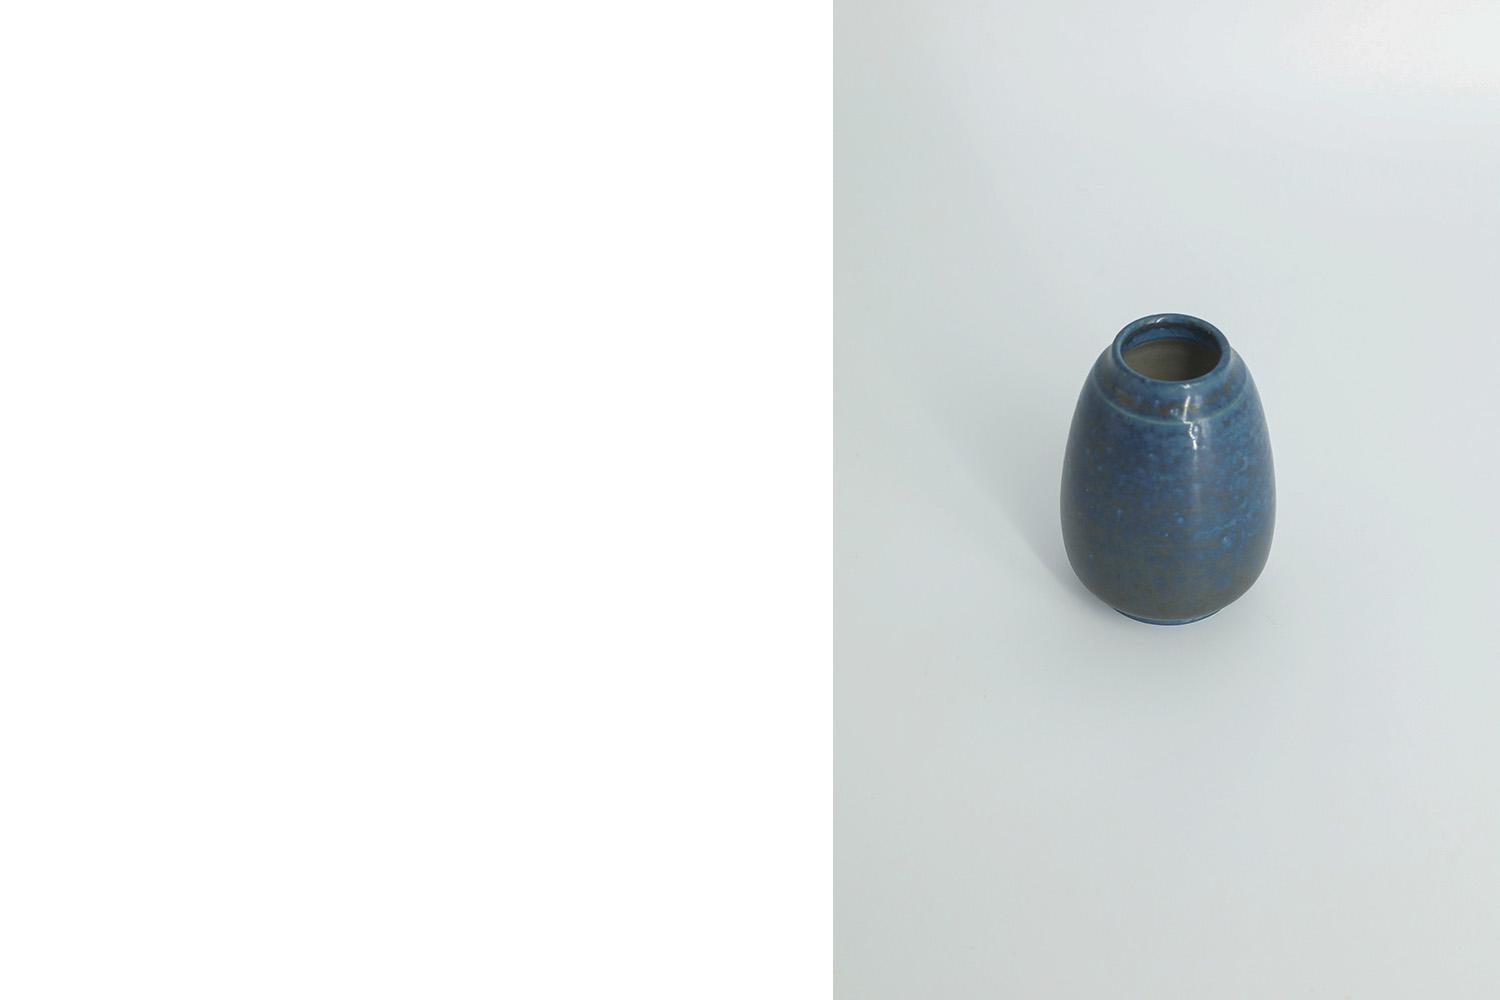 Small Scandinavian Modern Collectible Blue Stoneware Vase No. 108 by Gunnar Borg In Excellent Condition For Sale In Warszawa, Mazowieckie